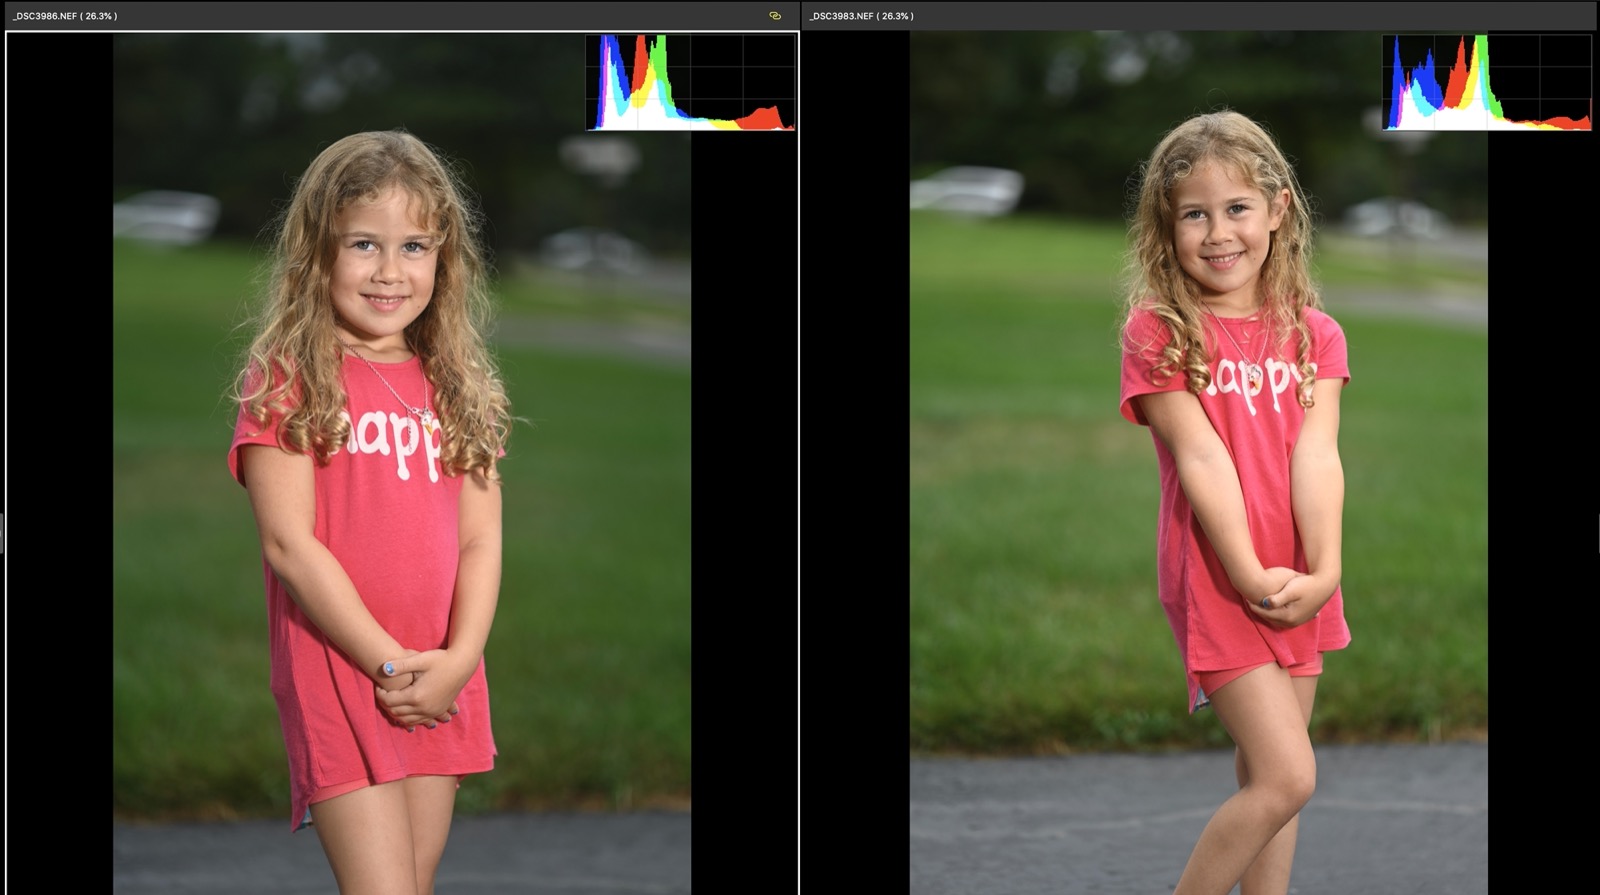 85mm Z Mount on Left, F Mount on Right